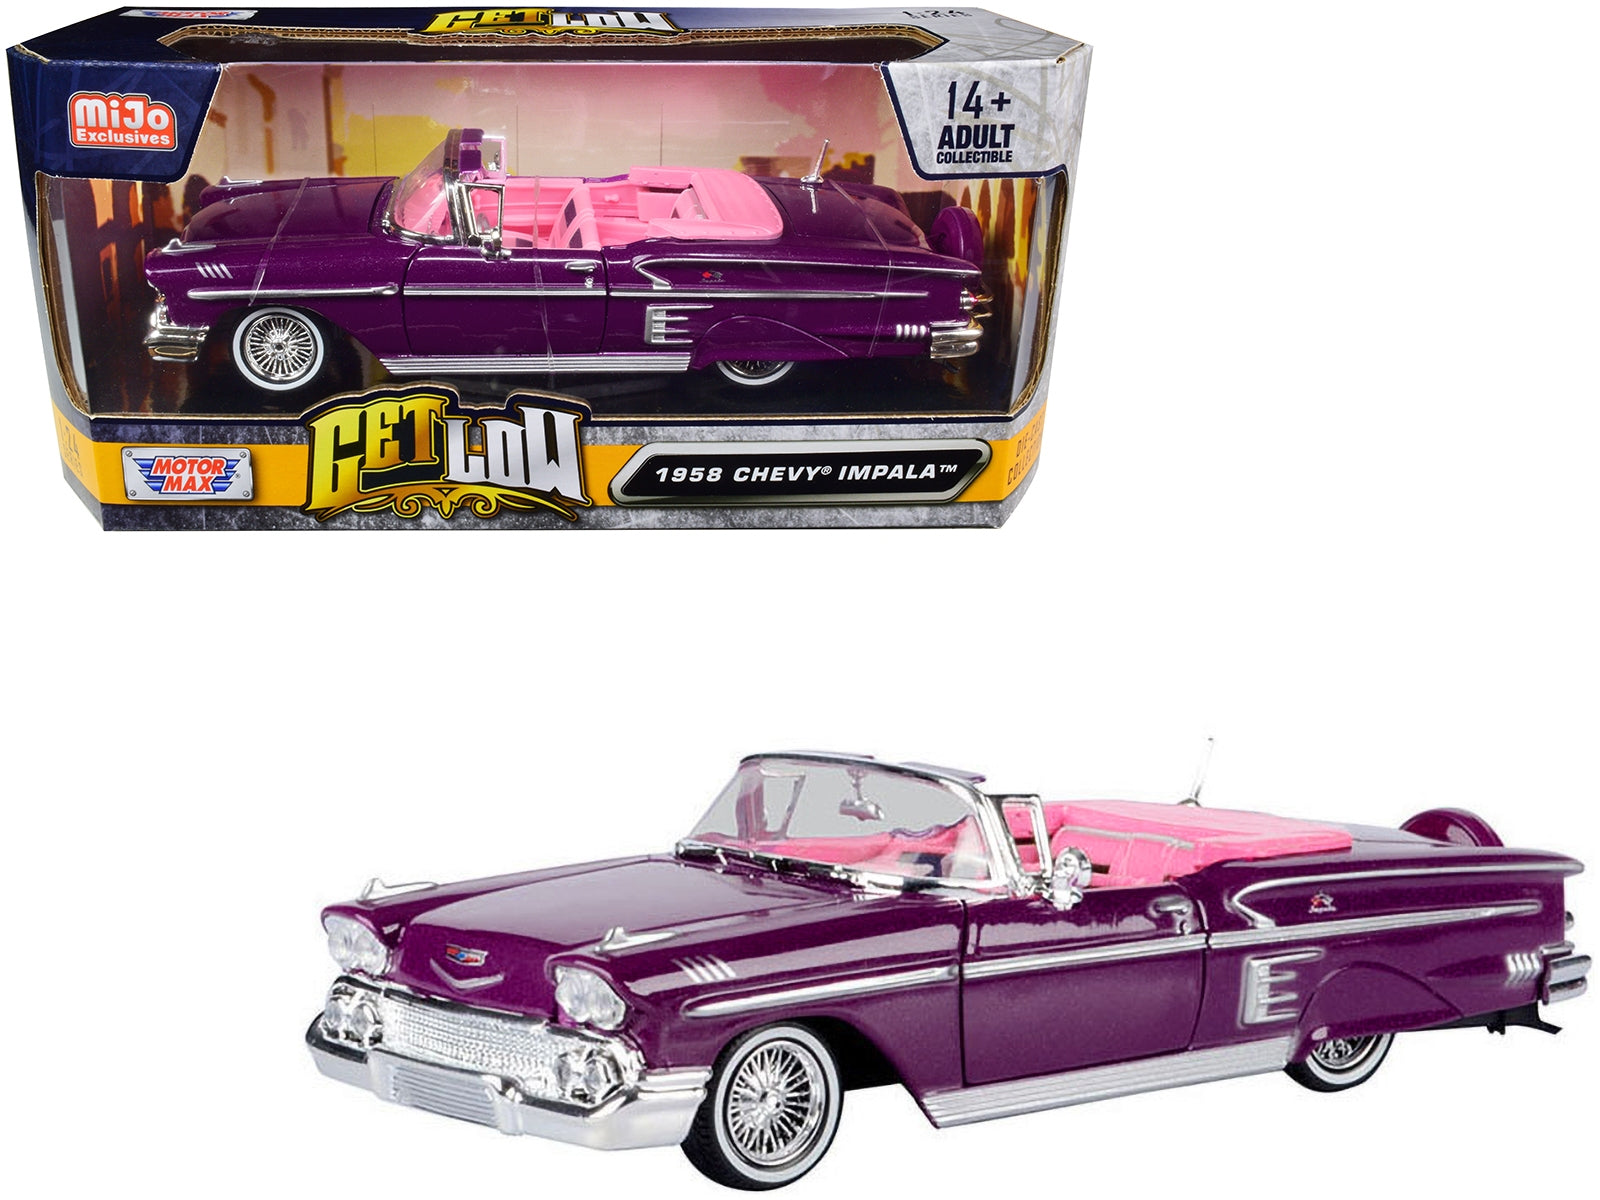 1958 Chevrolet Impala Convertible Lowrider Purple Metallic with Pink Interior "Get Low" Series 1/24 Diecast Model Car by Motormax